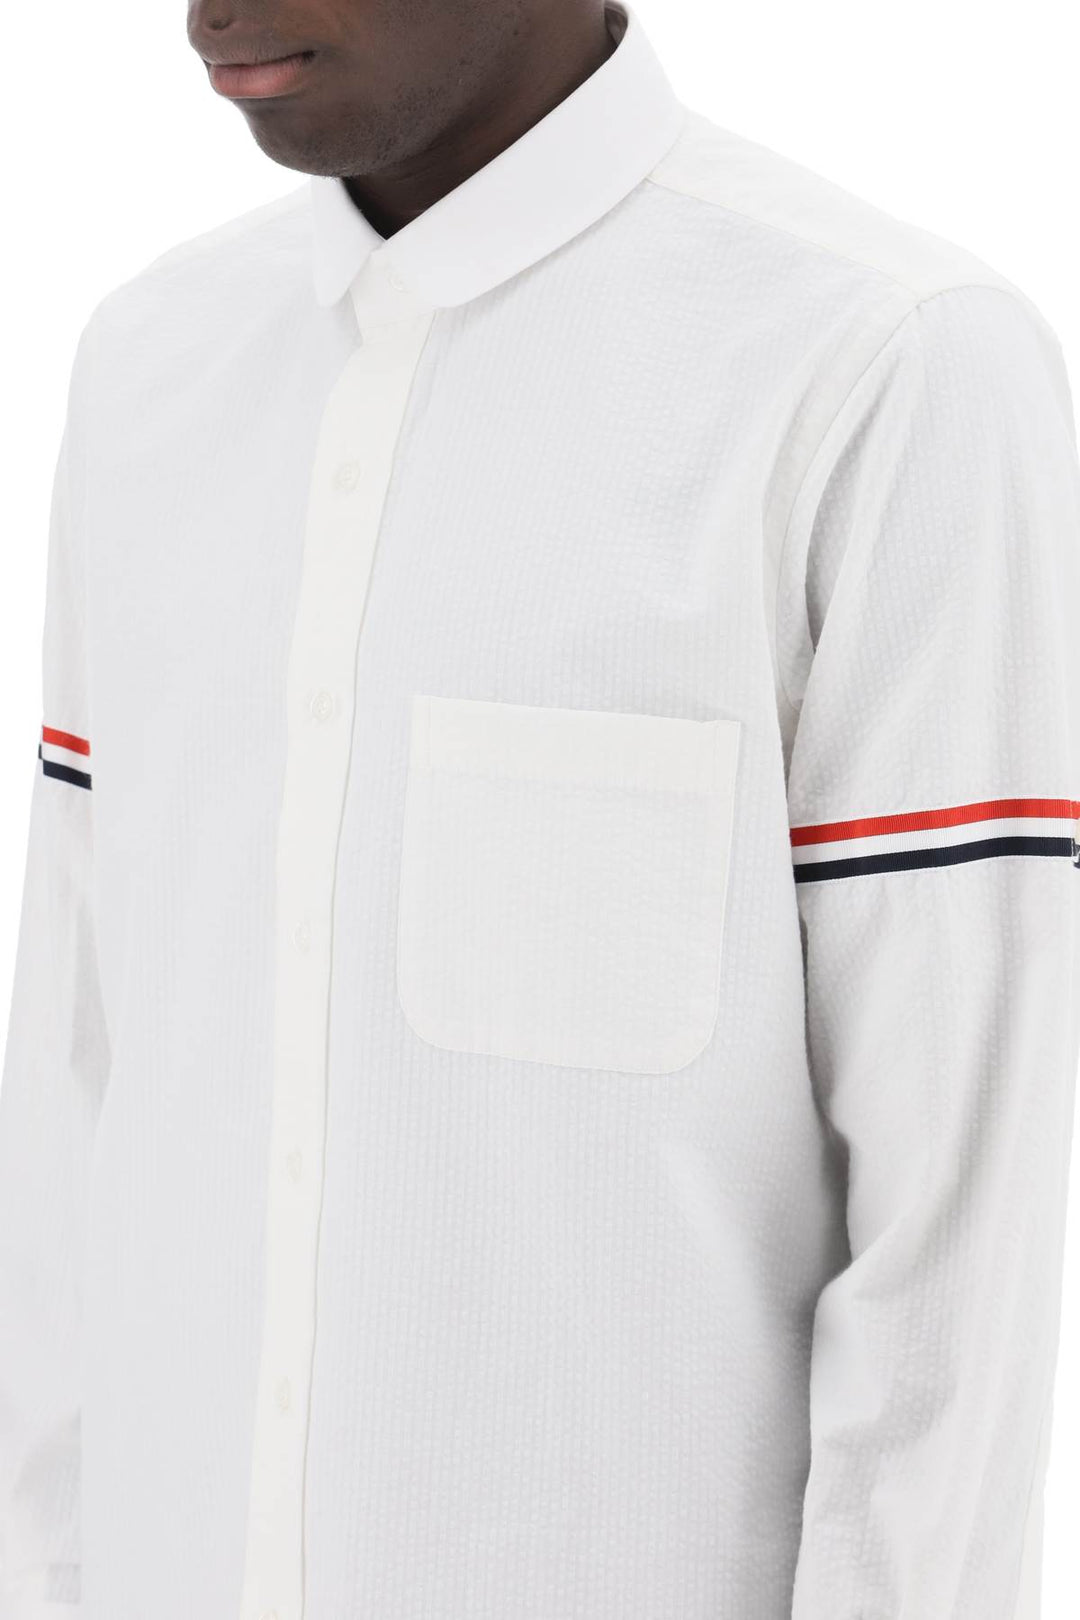 Thom browne seersucker shirt with rounded collar-3